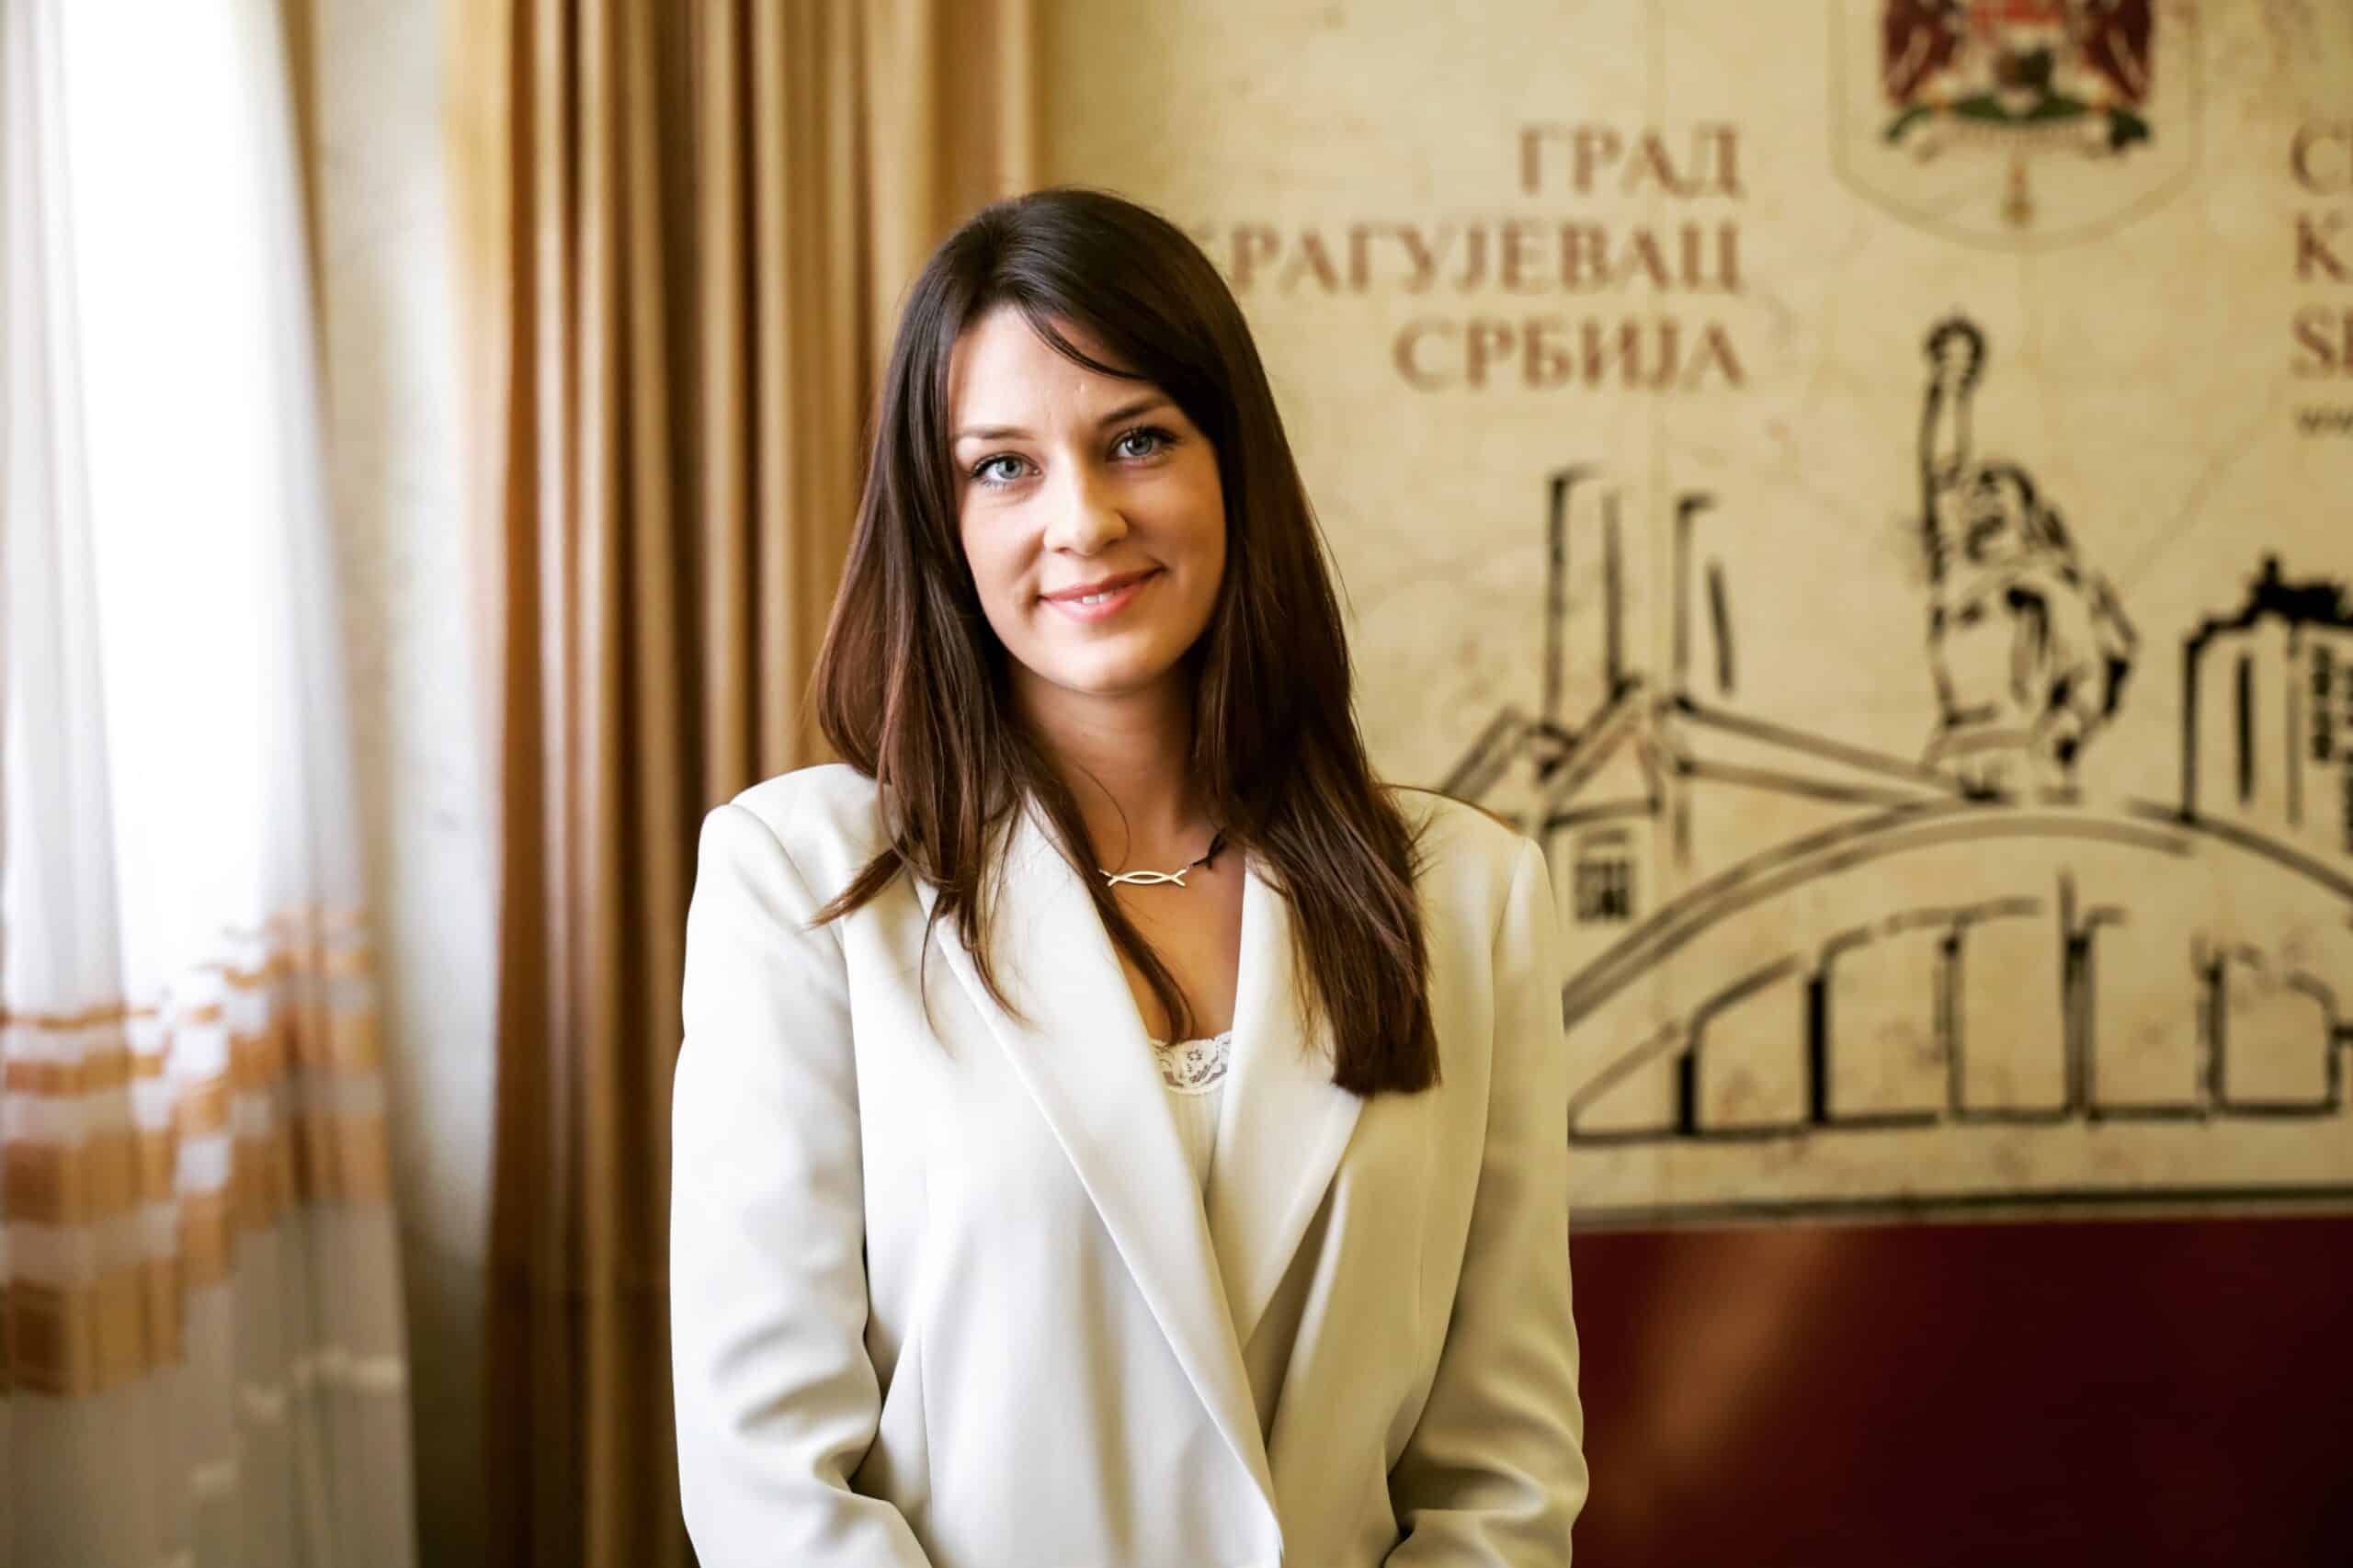 The Serbian lawyer who won a full scholarship to the UK